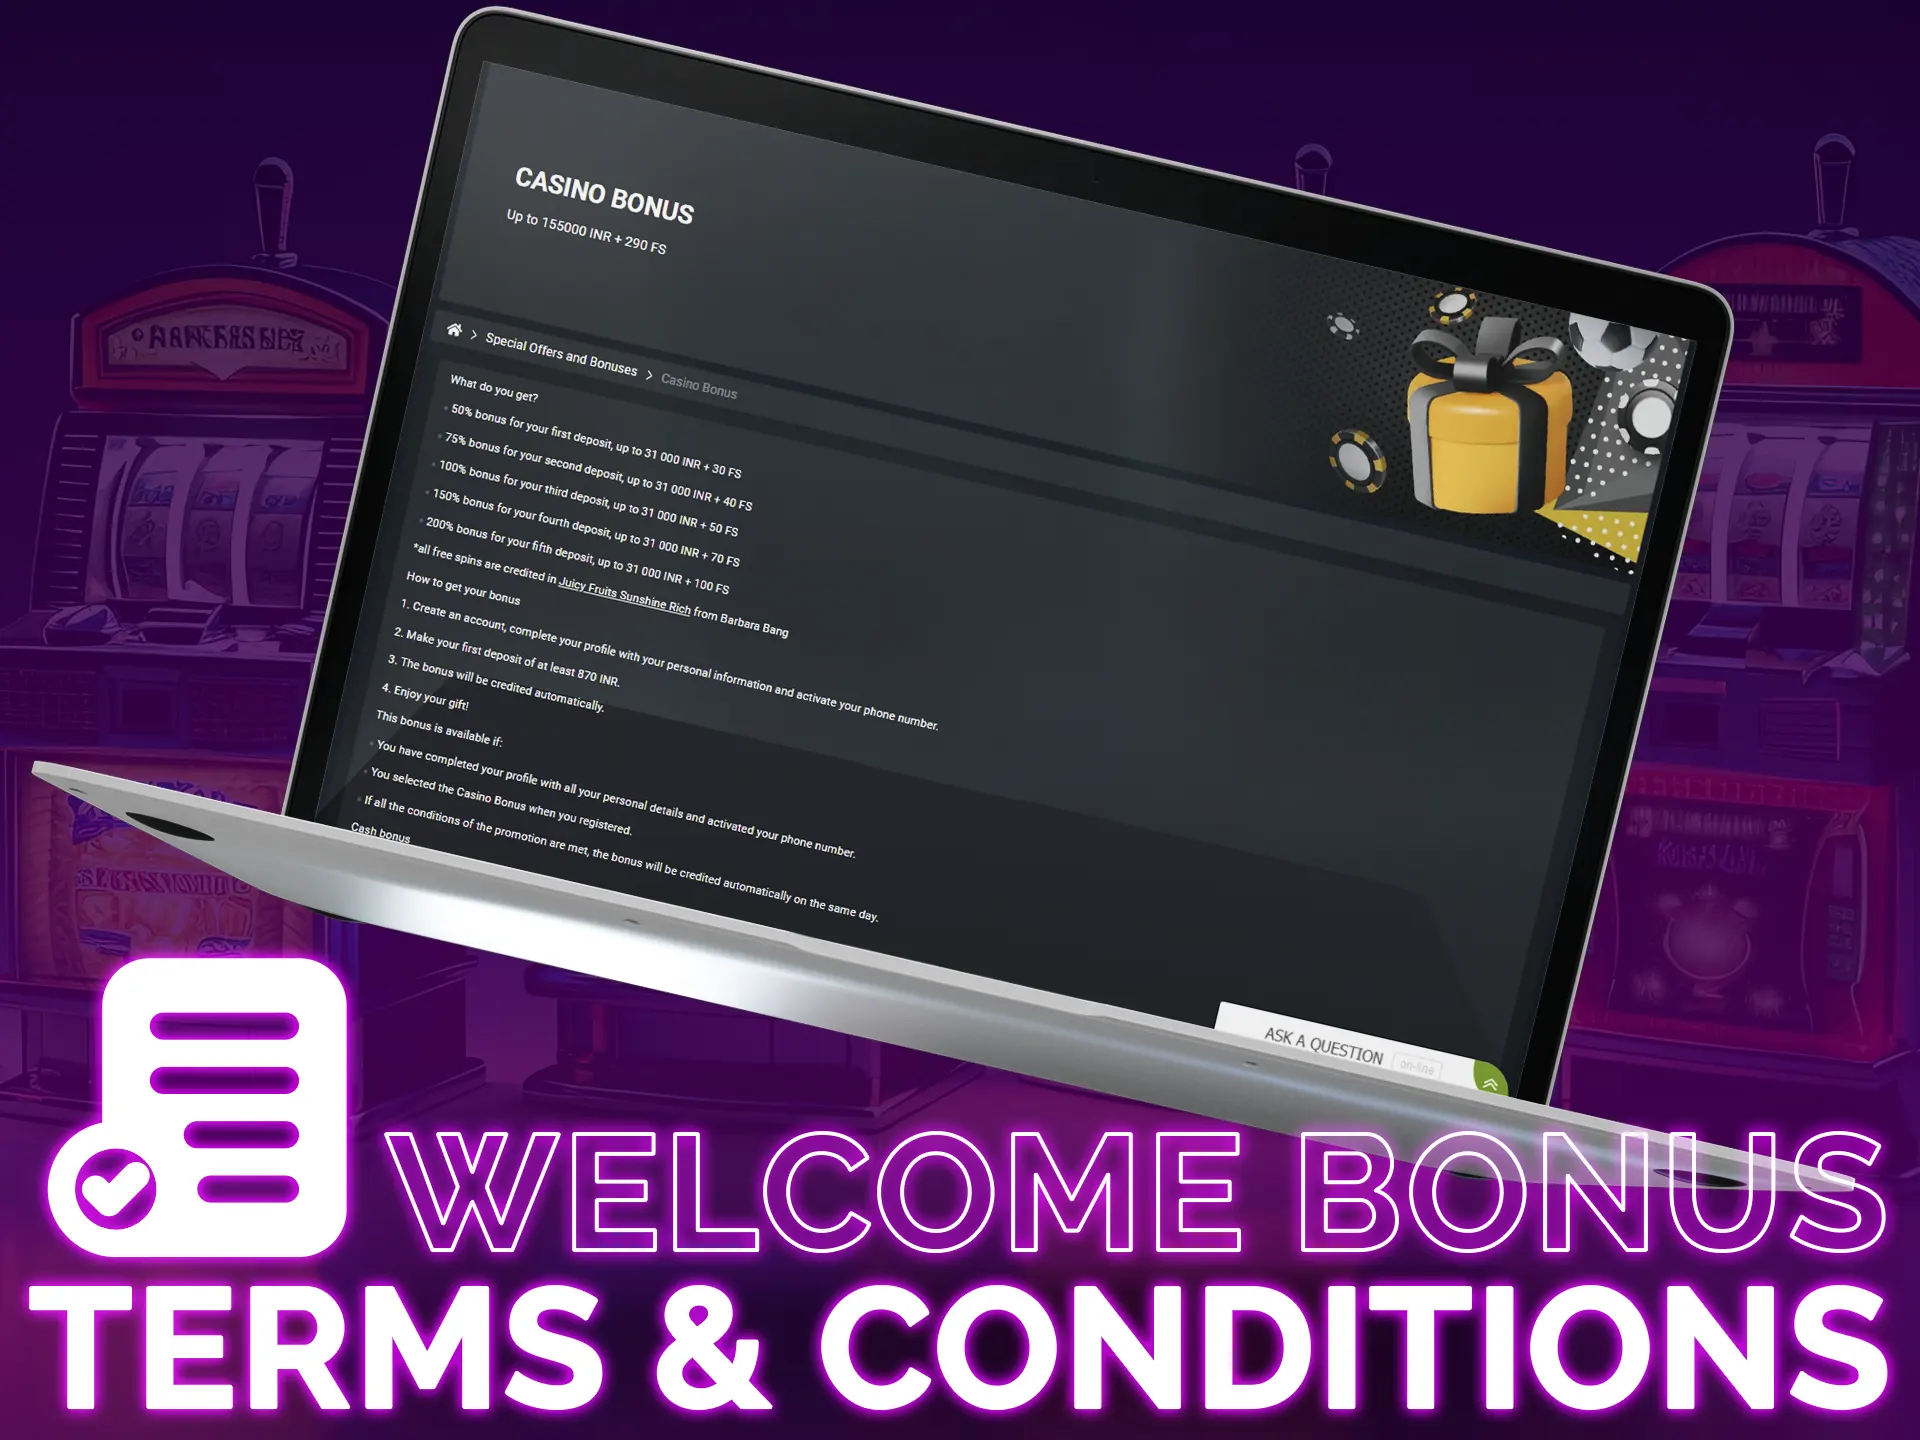 Learn the terms and conditions to get a welcome bonuses.